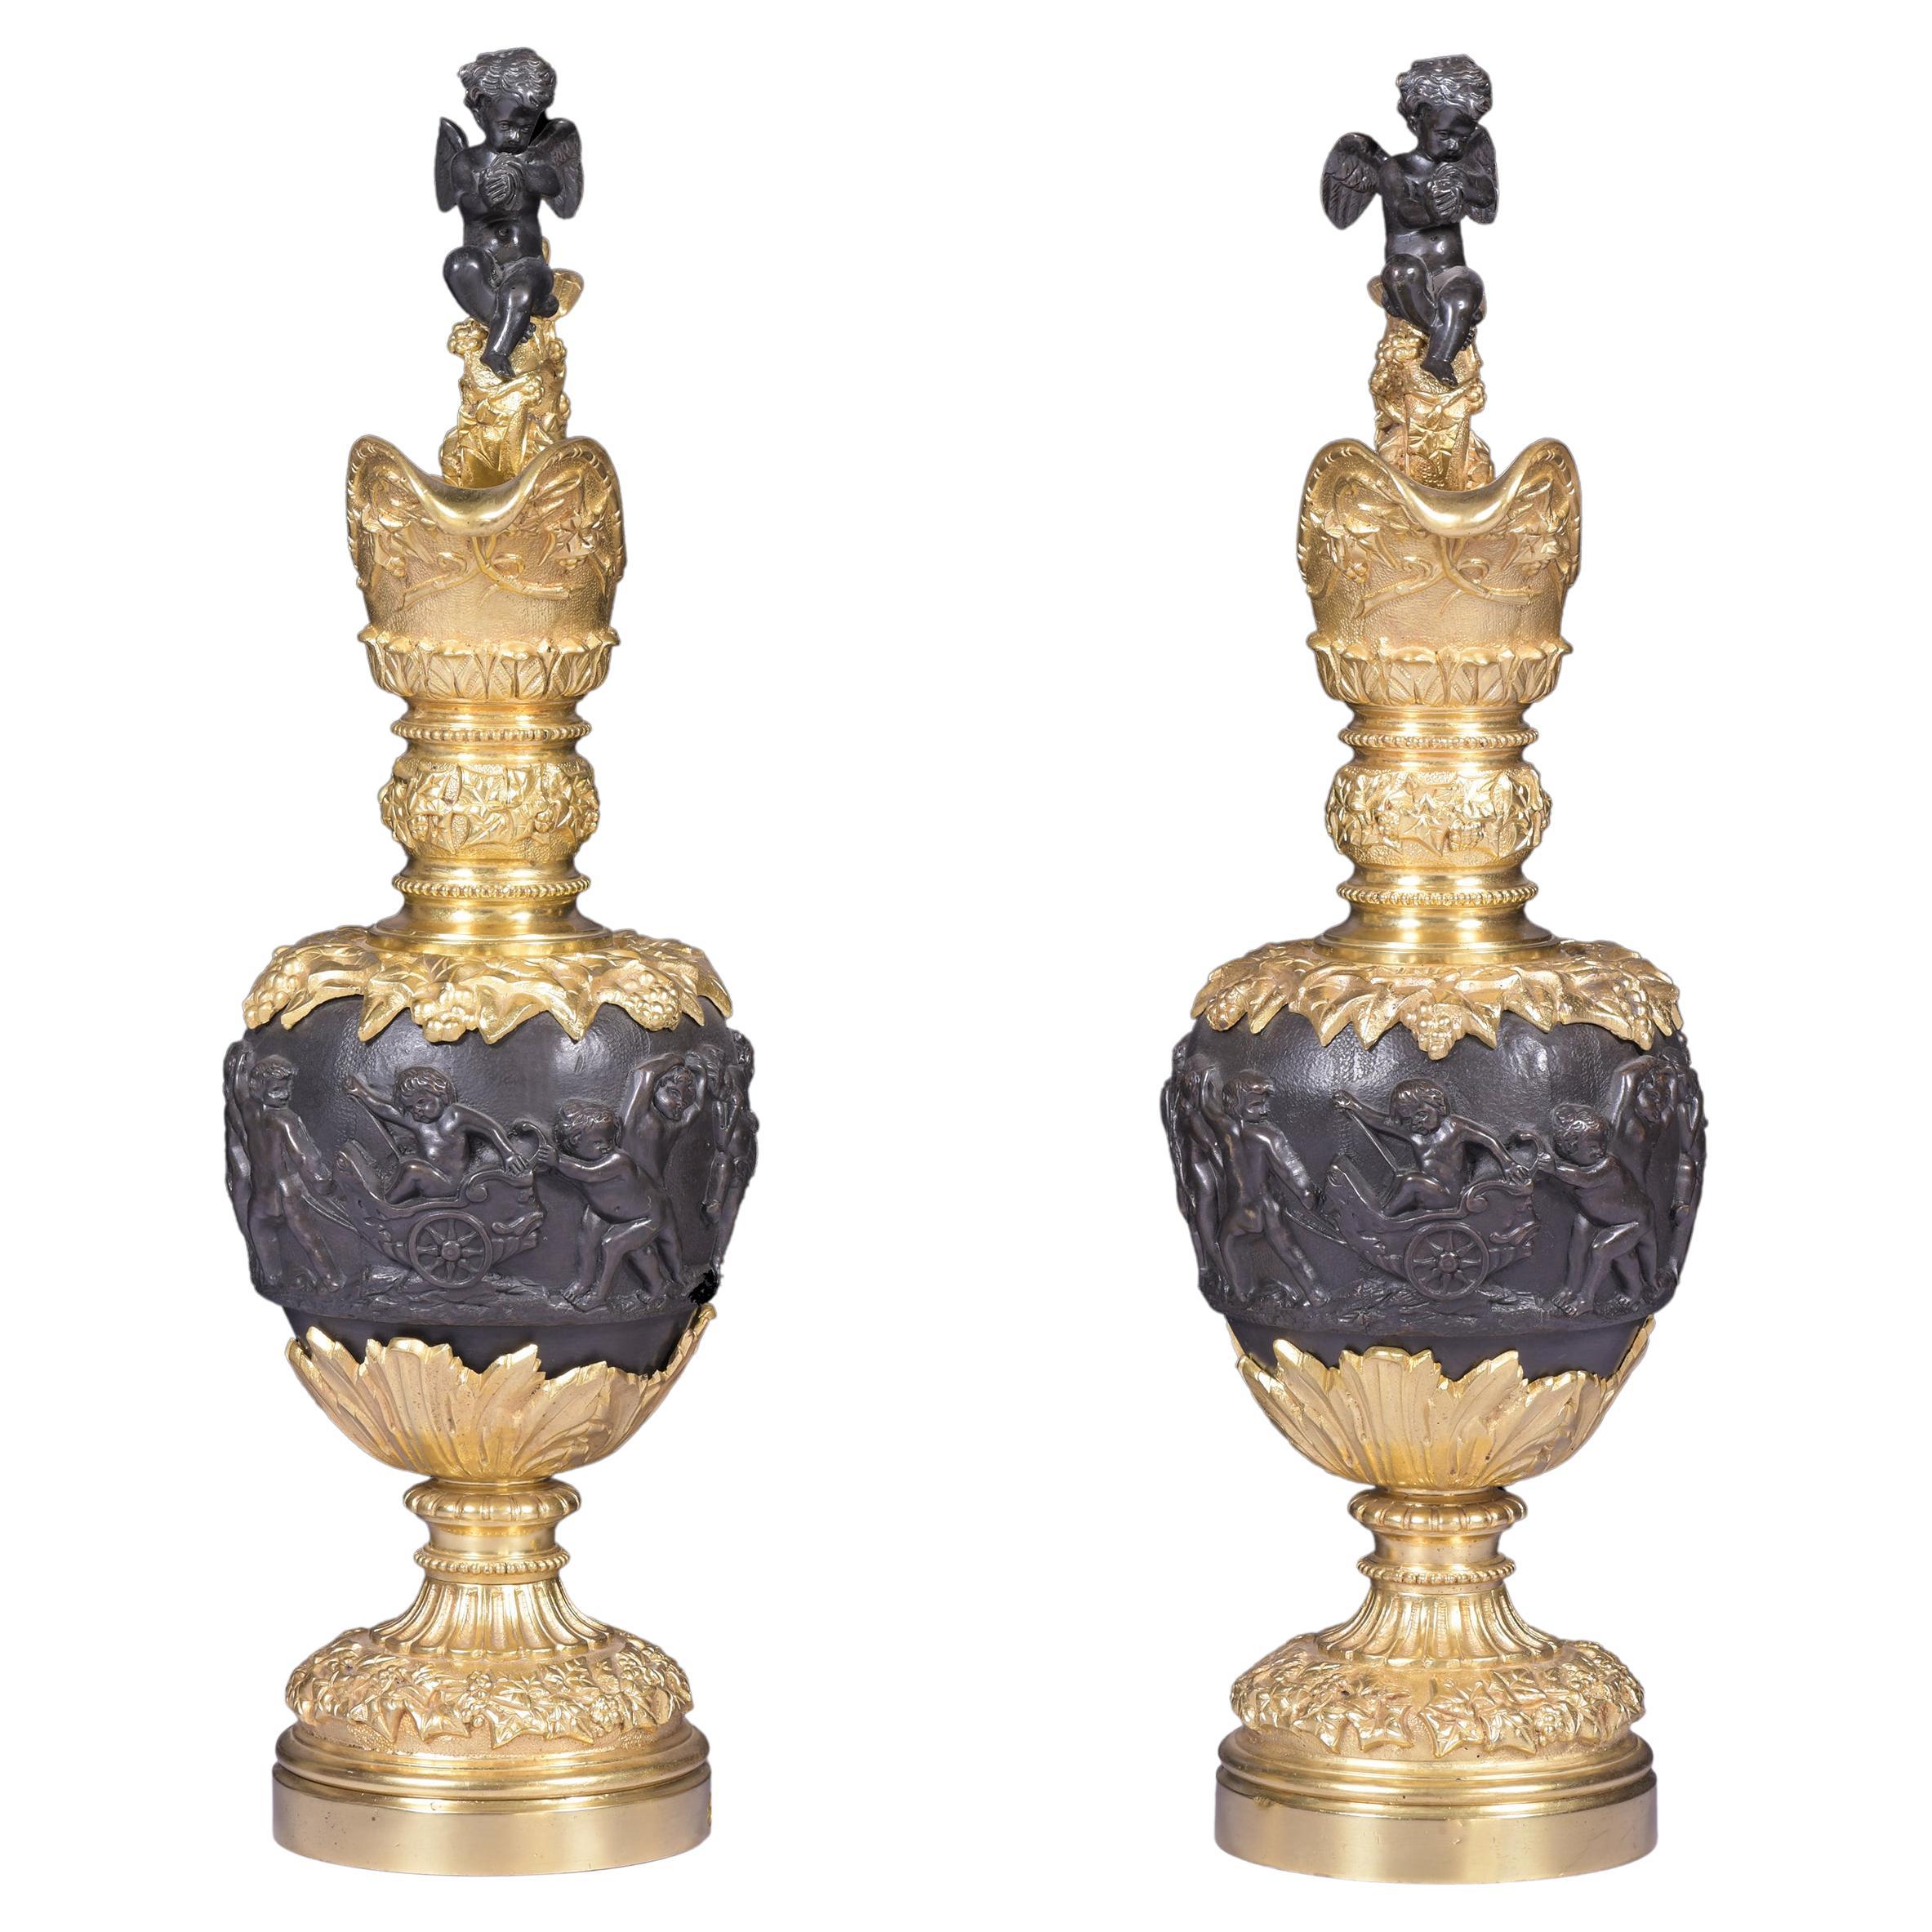 Pair Of 19th Century Ormolu & Bronze Ewers In The Renaissance Style For Sale